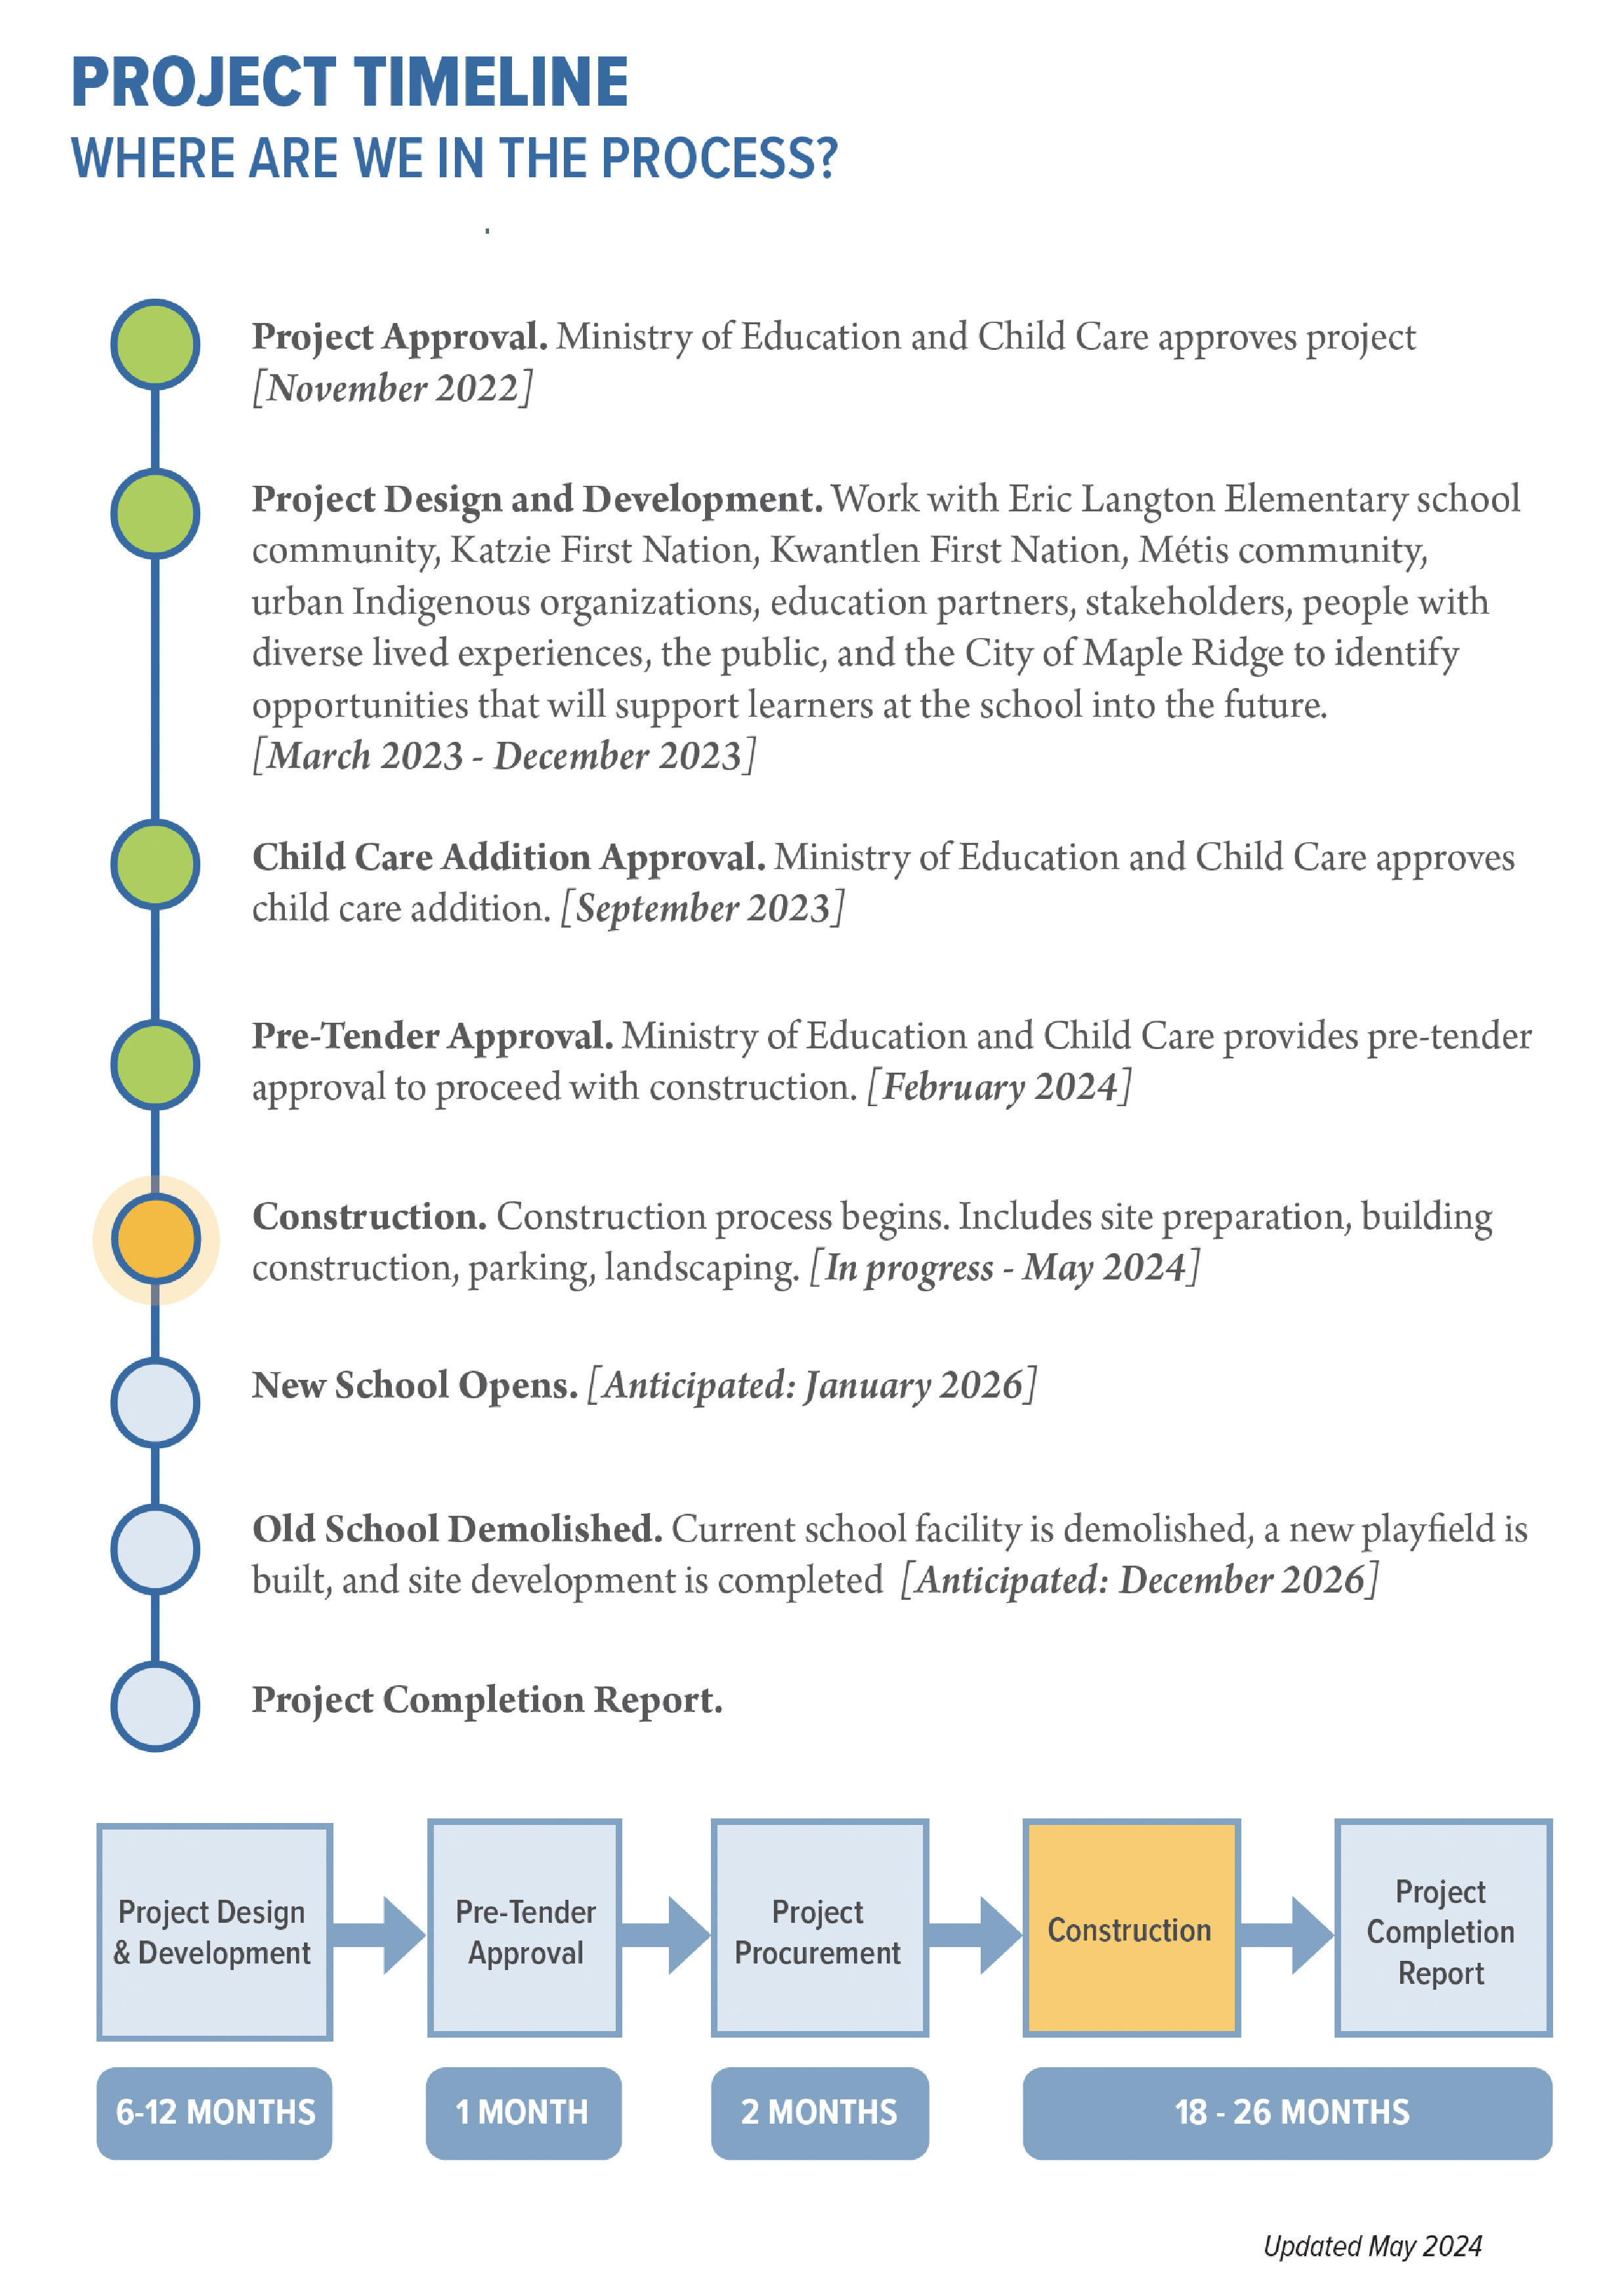 Project Timeline for Eric Langton Elementary School